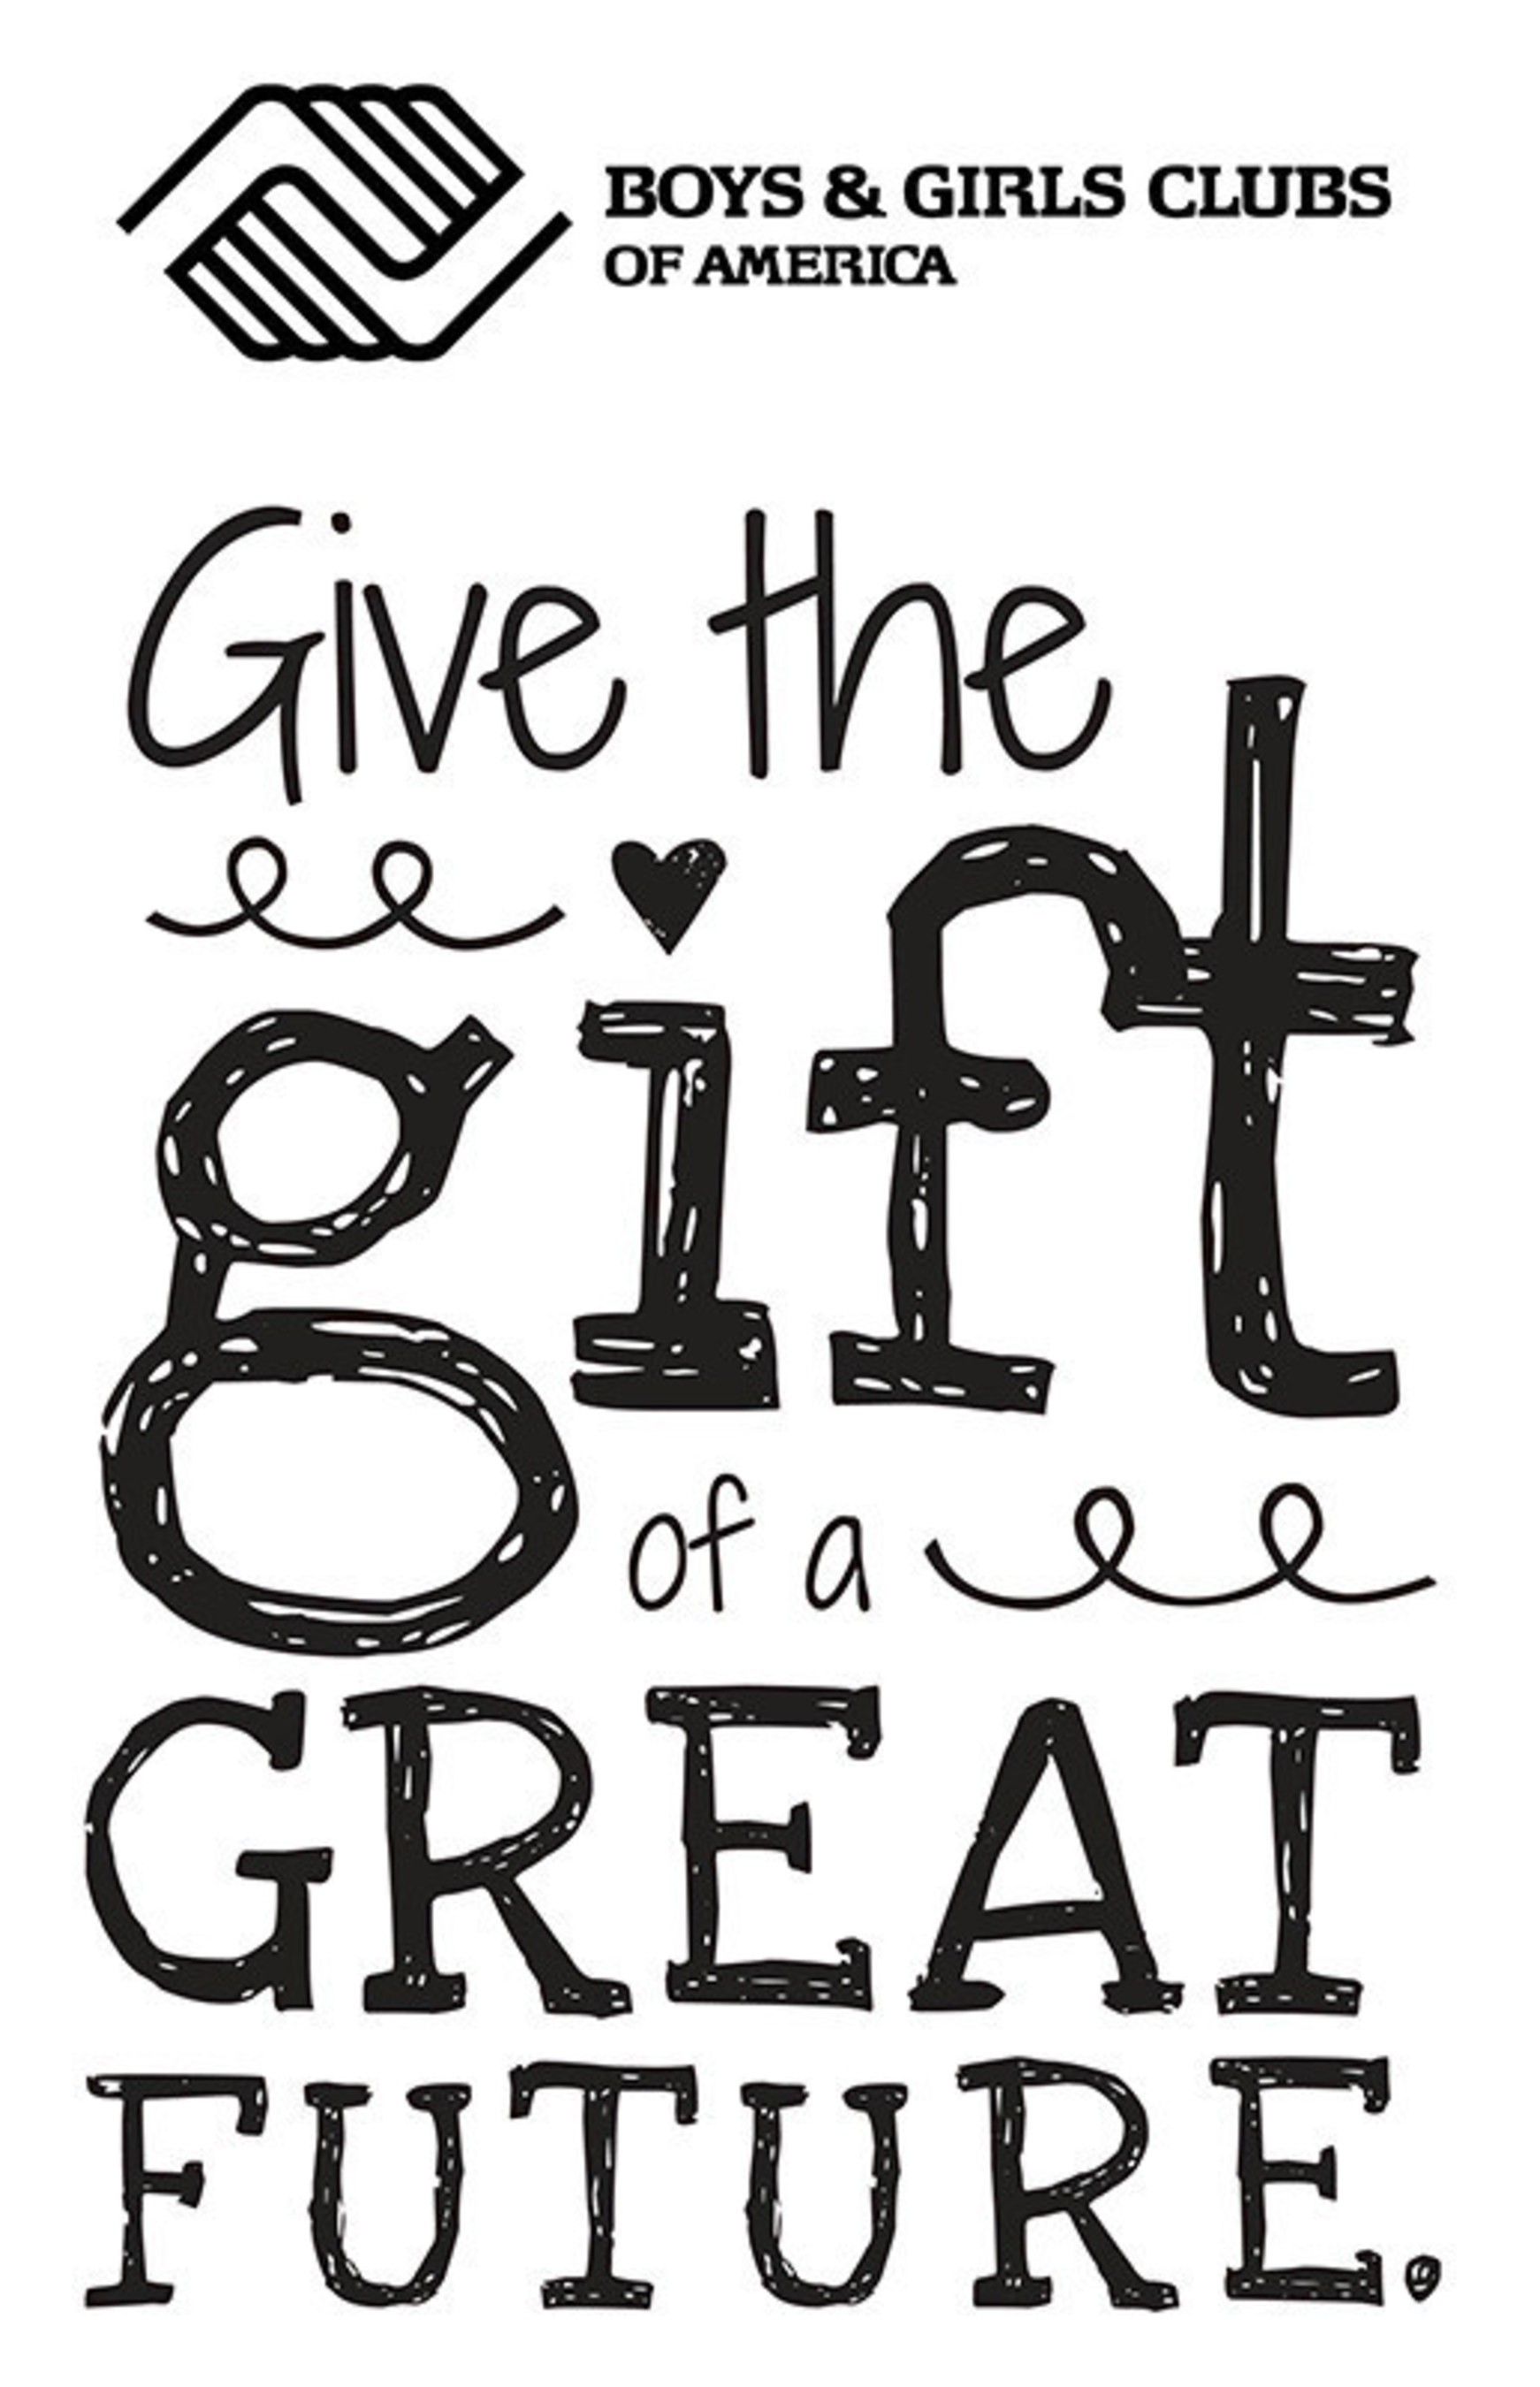 Boys & Girls Clubs of America - Give the Gift of a Great Future this holiday season at greatfutures.org.